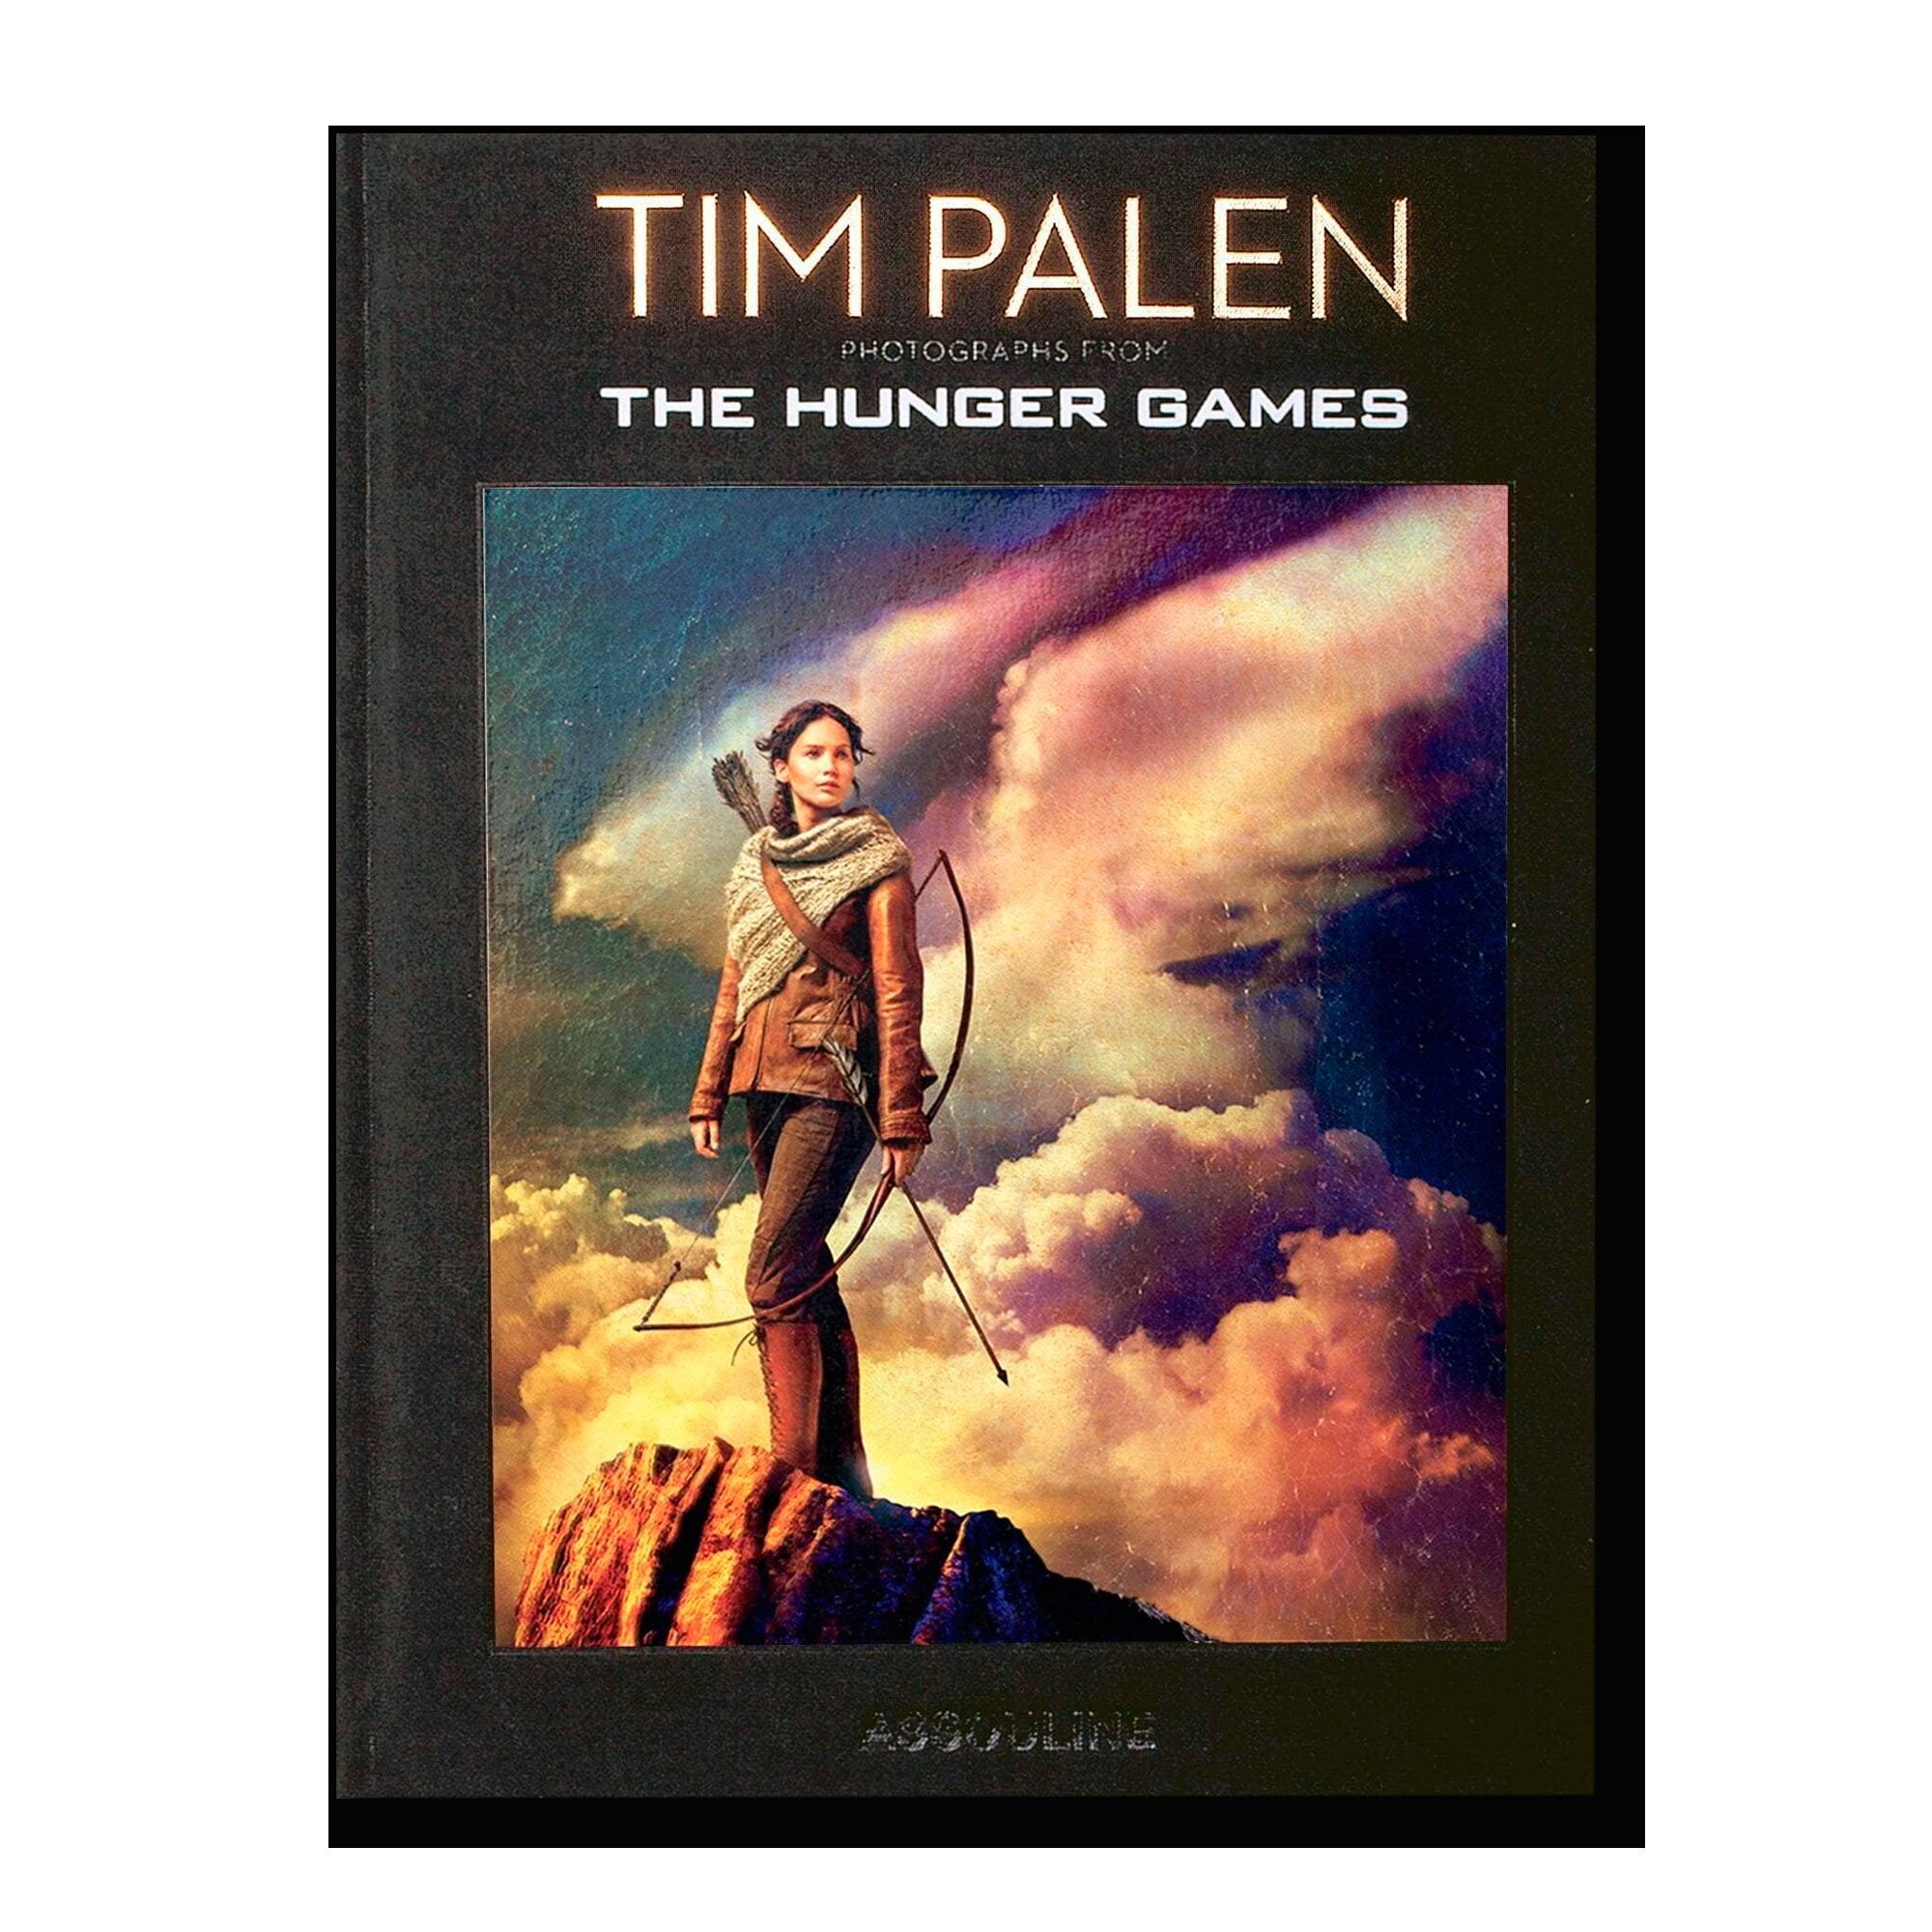 Tim Palen: Photographs from The Hunger Games